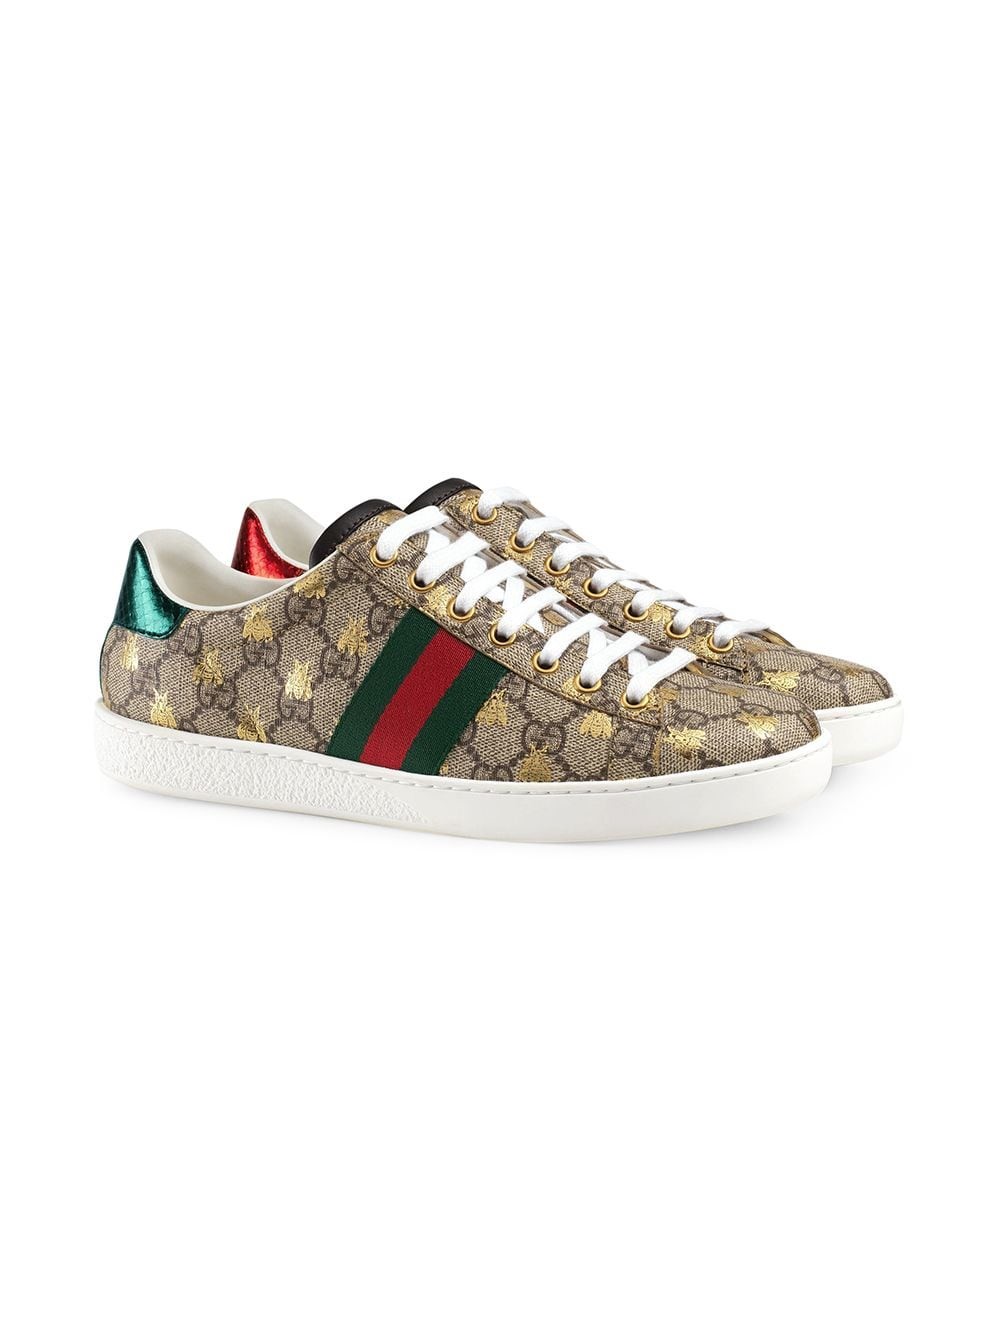 gucci GG PRINT EMBROIDERED BEE SNEAKERS available on 0 - 25713